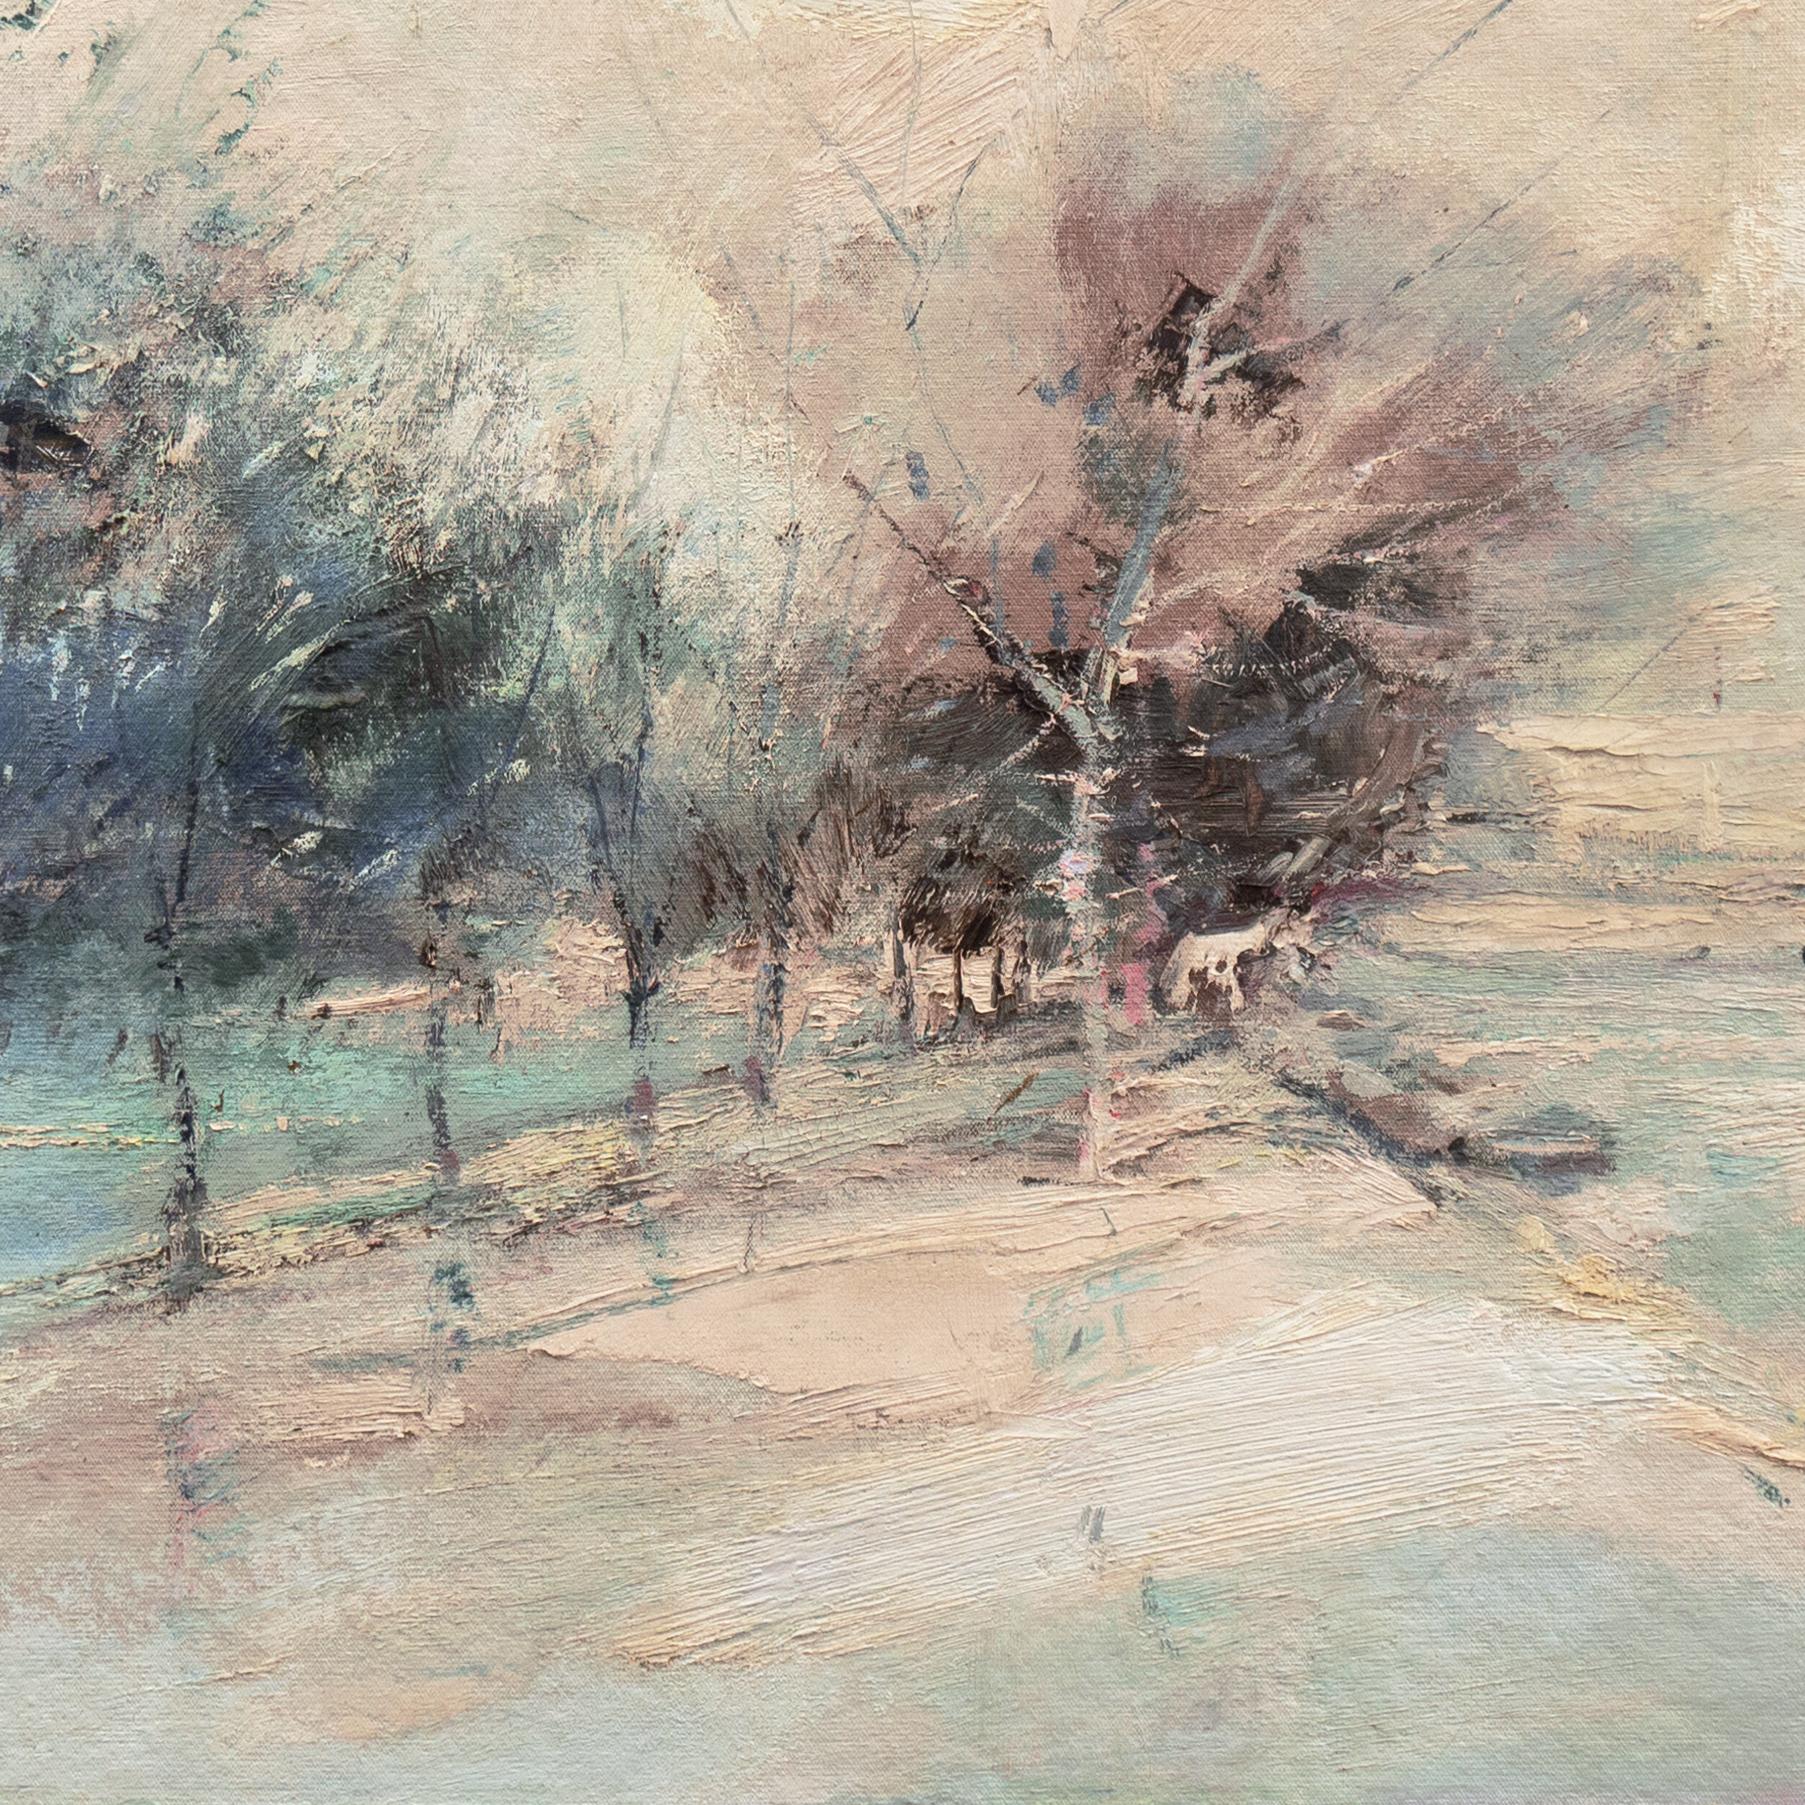 Signed lower right, 'Charles Harris', for Charles Gordon Harris (American, 1891-1963)  and additionally signed verso.

A substantial and atmospheric landscape showing a view of the Seine in winter with bare trees contrasted against a background of